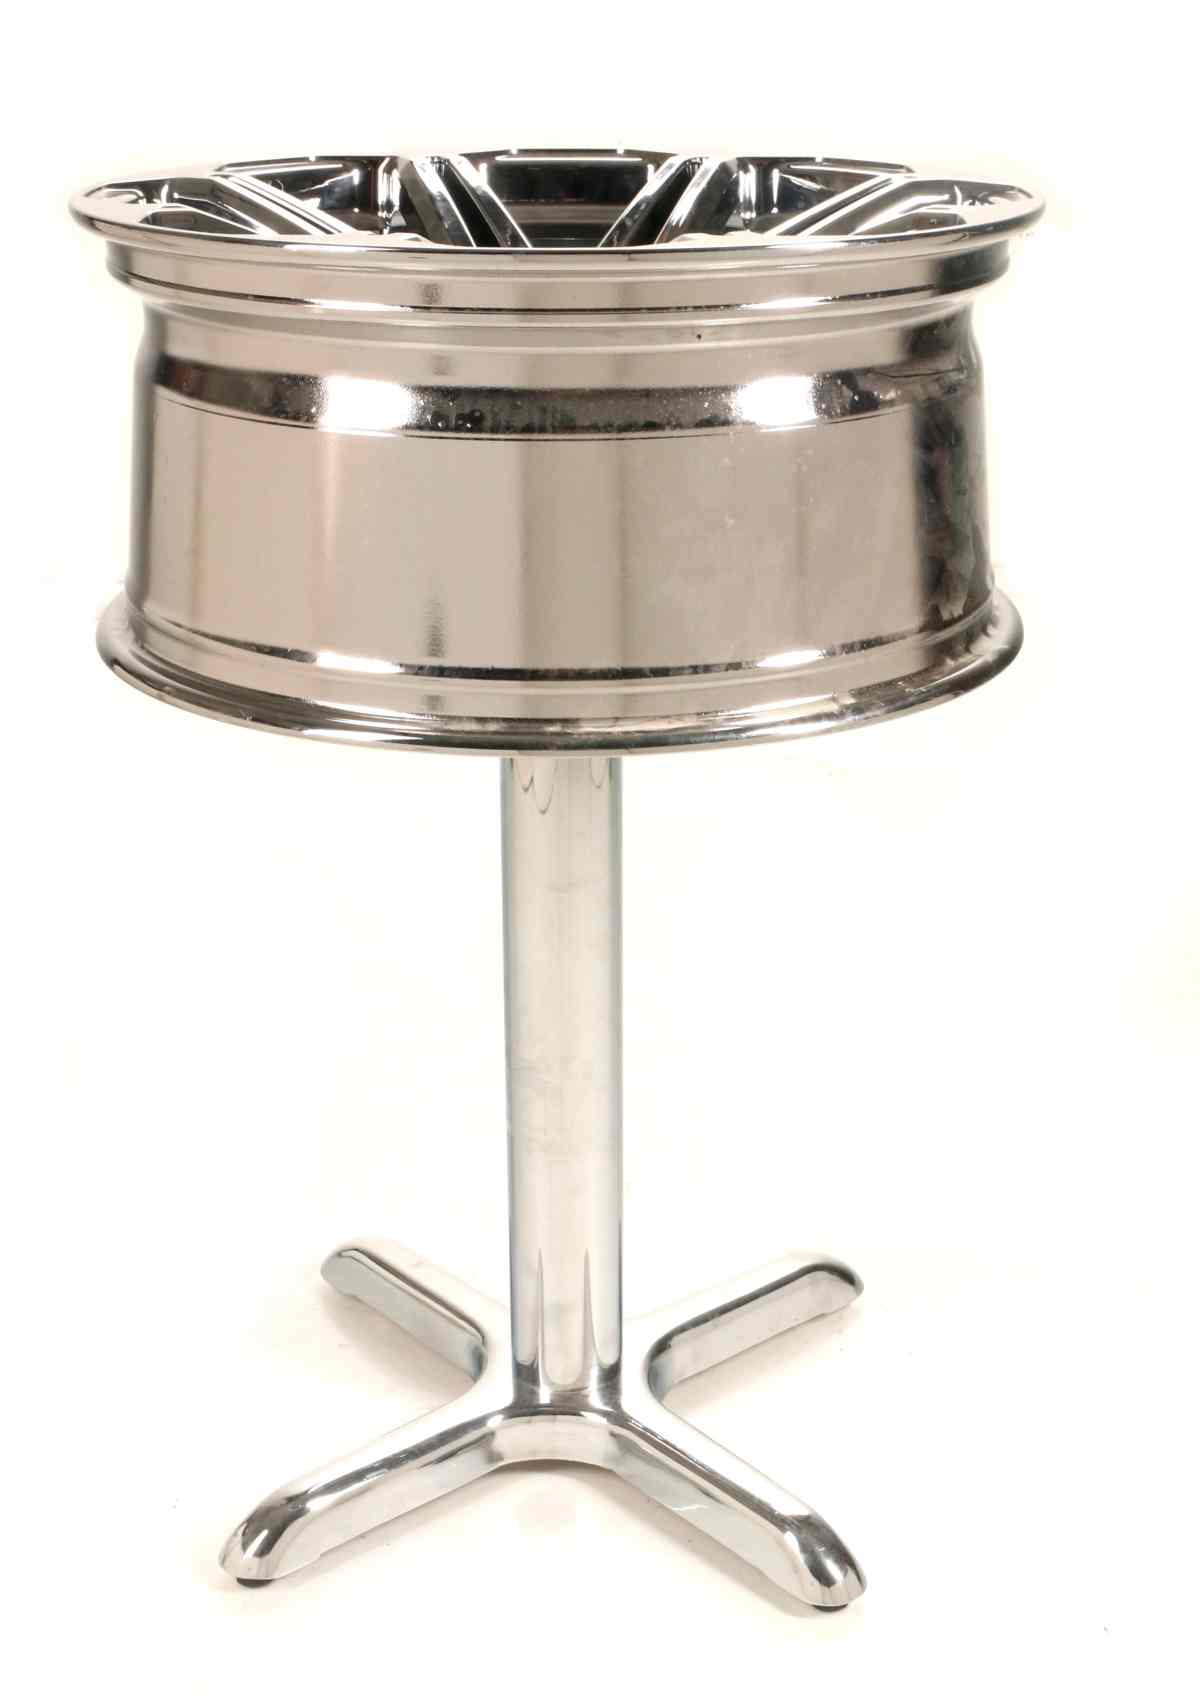 'STAND TABLE' FASHIONED FROM CHROME TRUCK WHEEL